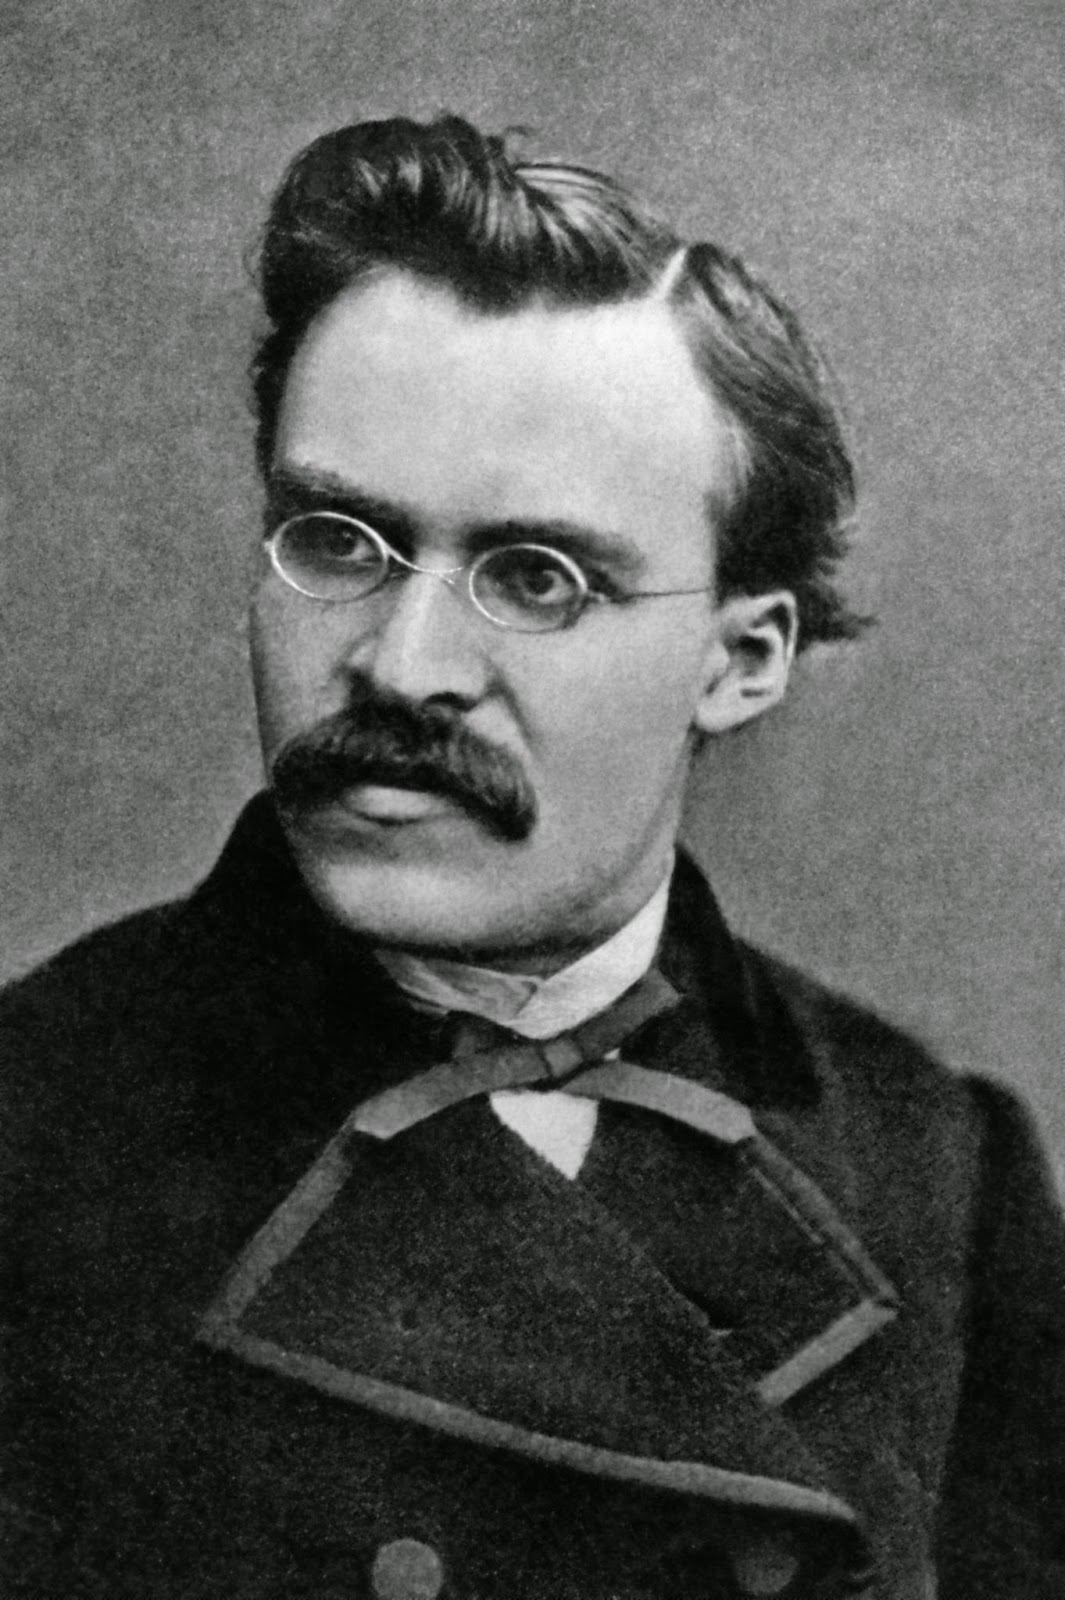 Top 14 Greatest Philosophers And Their Books - Nietzsche - Beyond Good and Evil